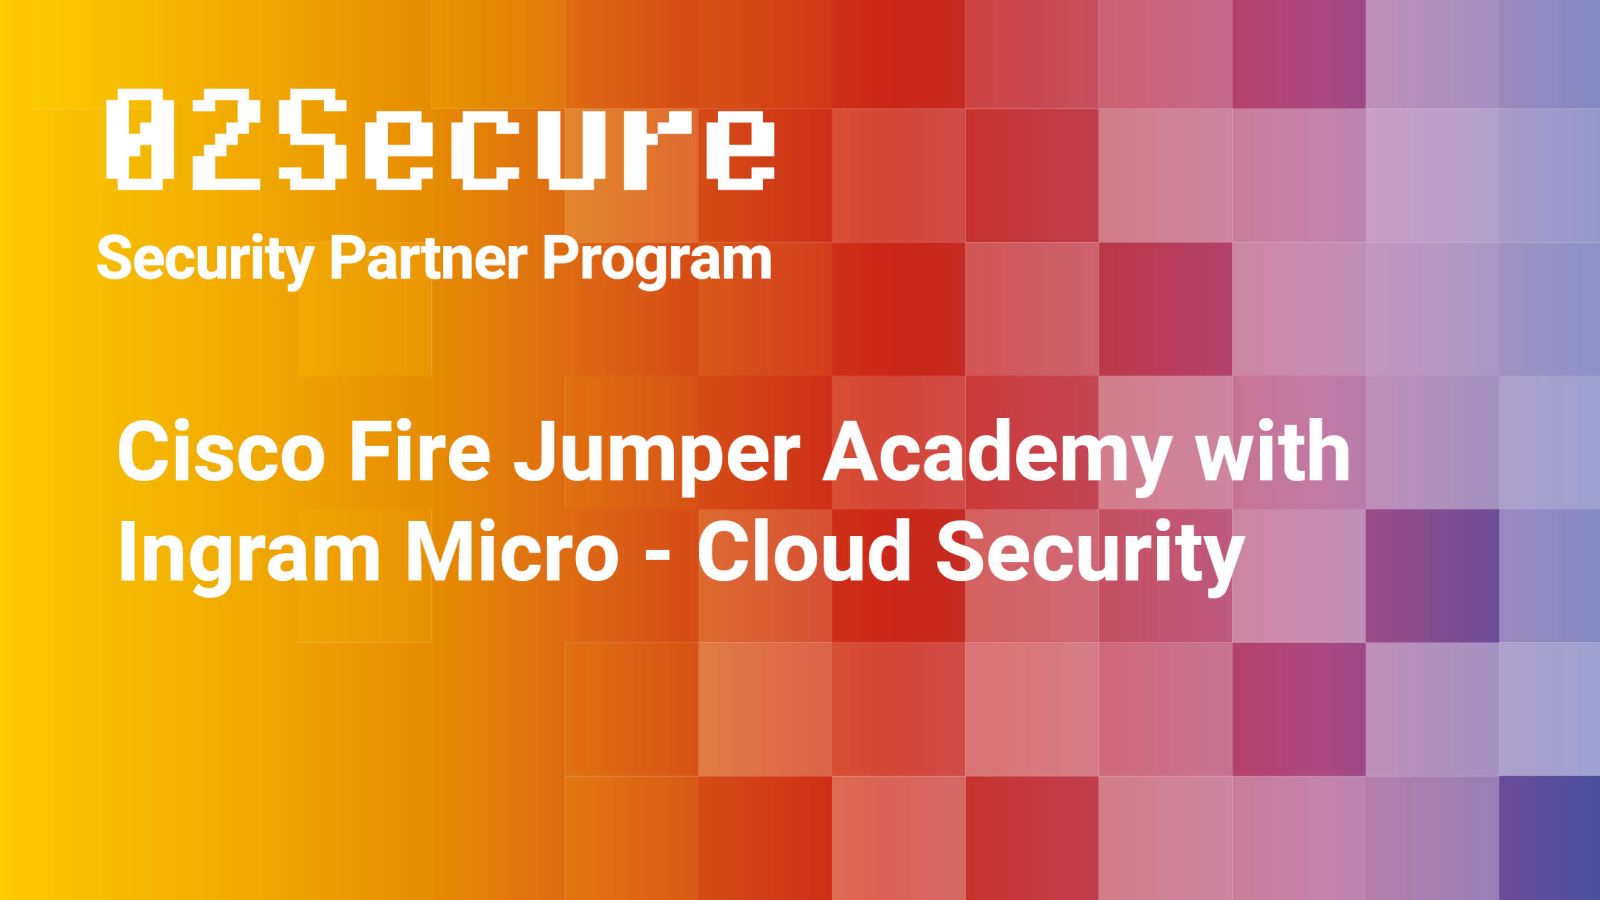 Cisco Fire Jumper Academy with Ingram Micro - Cloud Security Featured Image